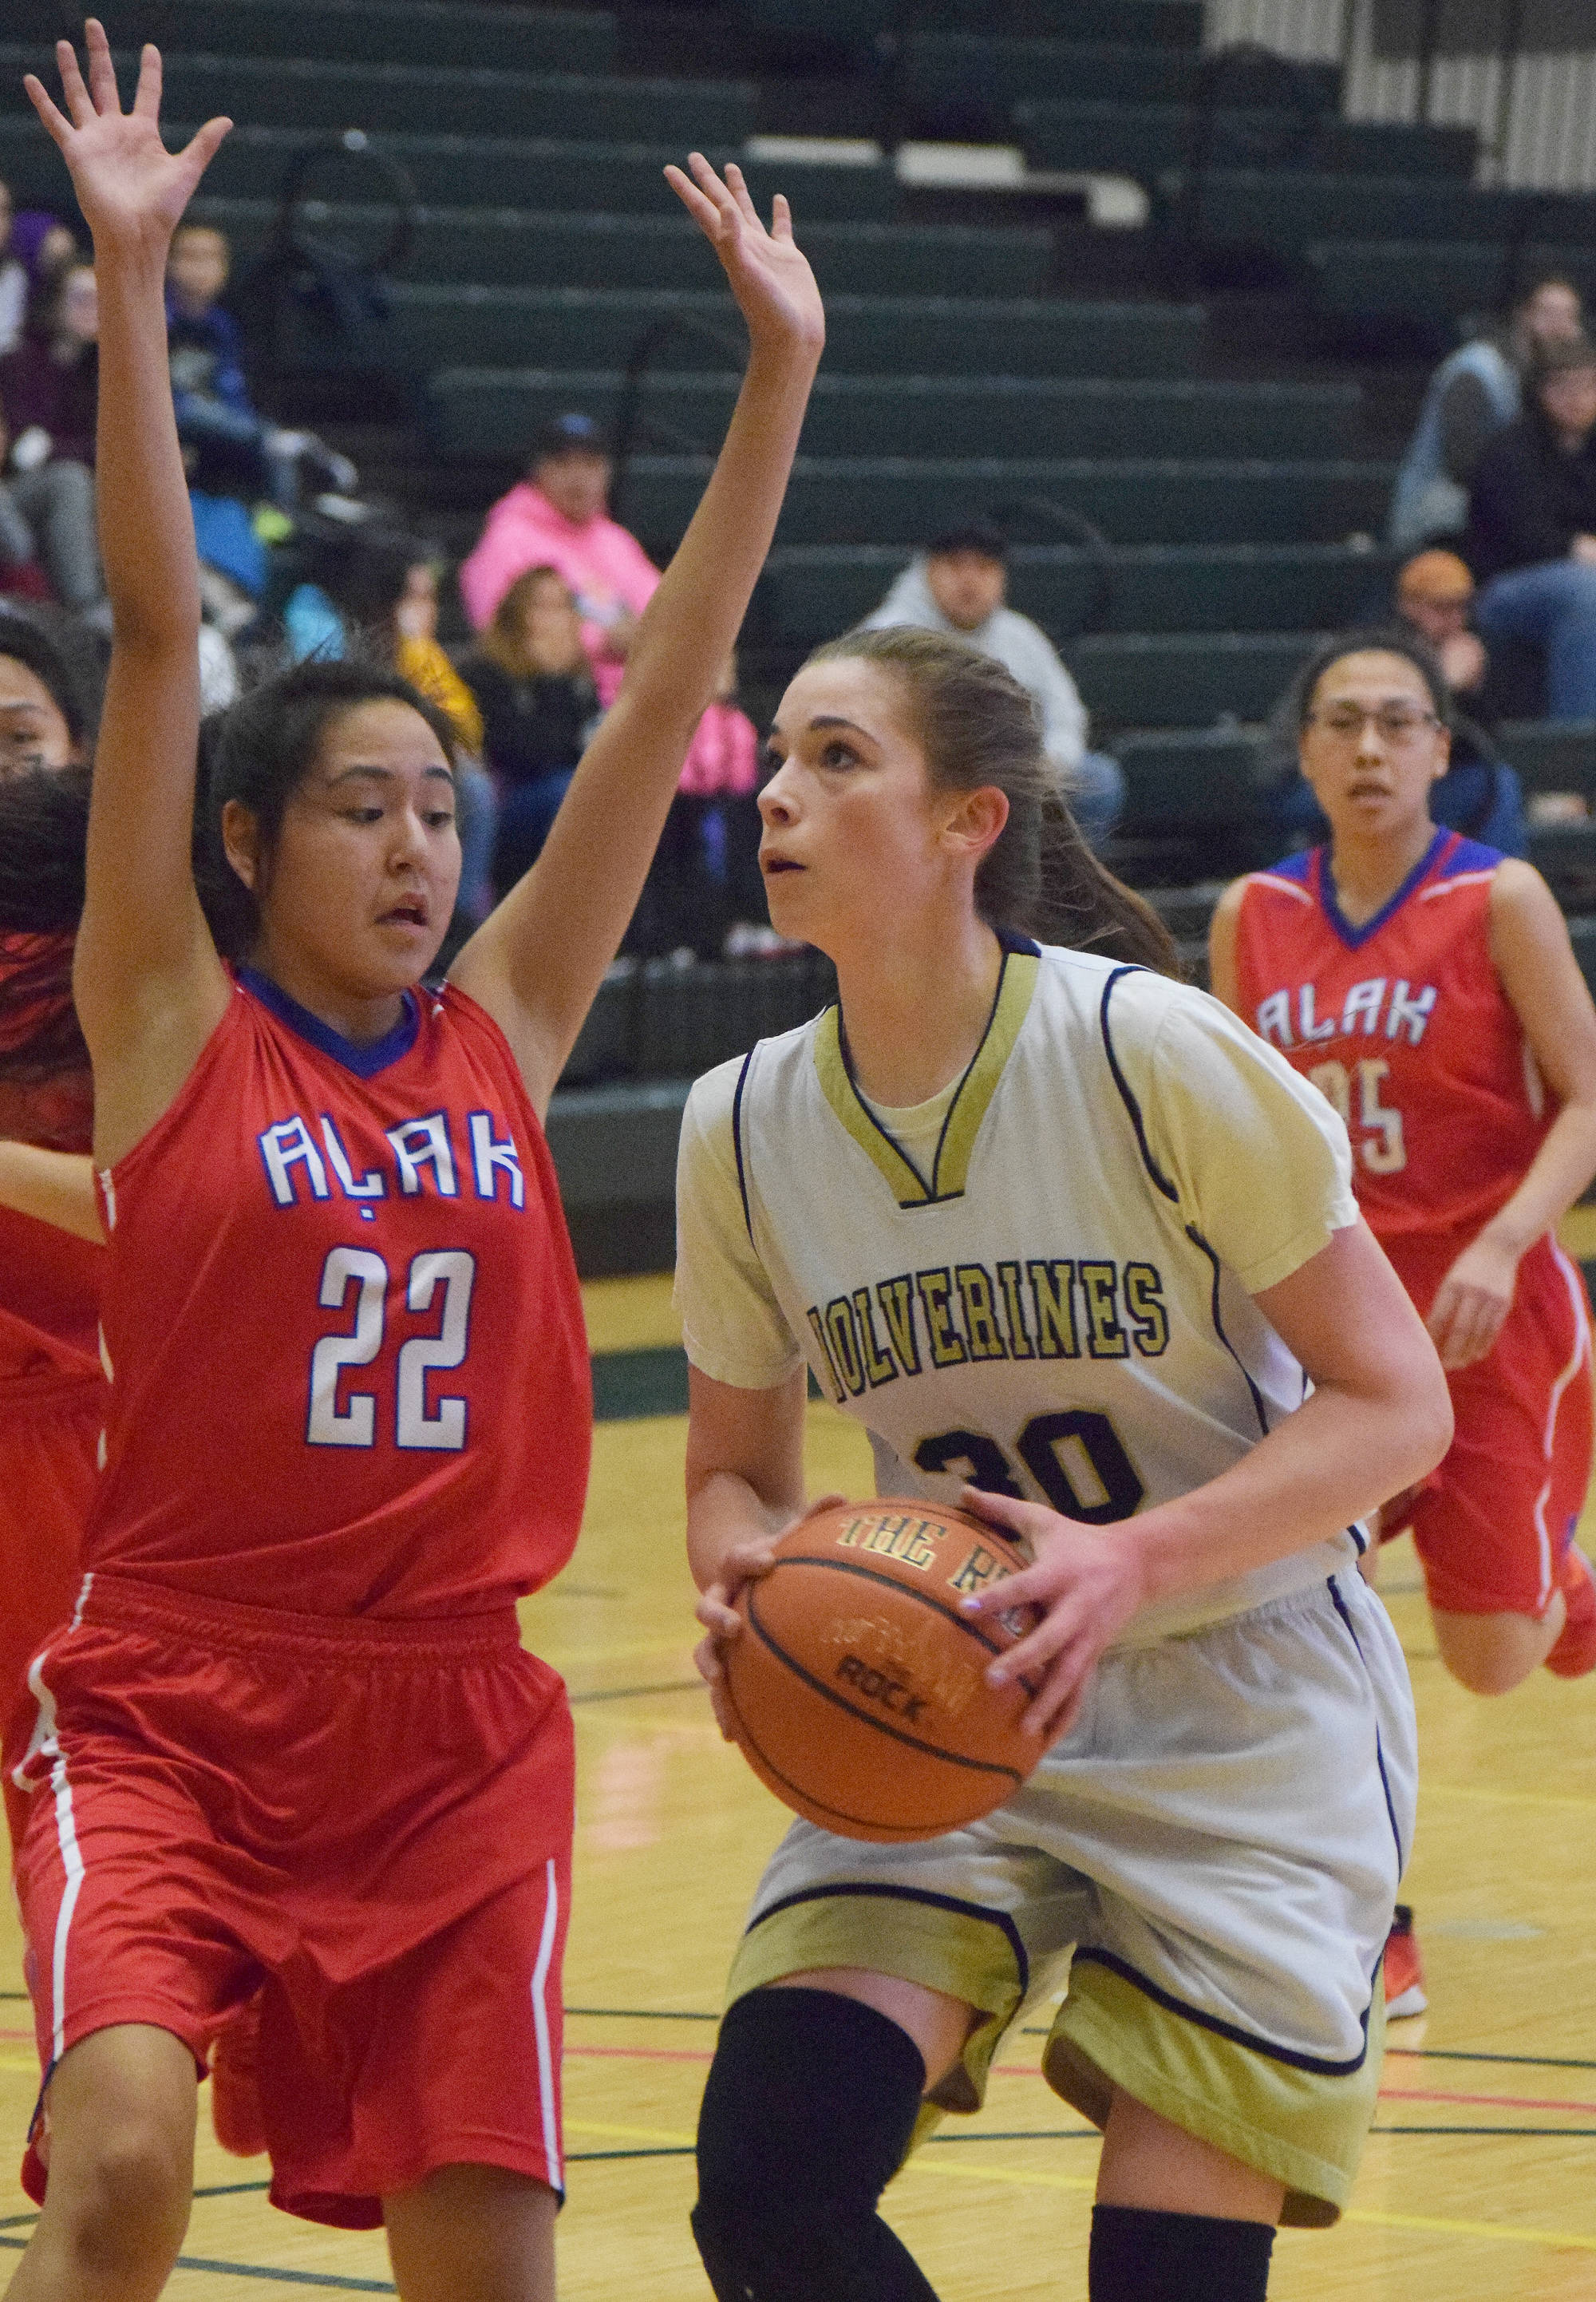 Ninilchik’s DeeAnn White looks for a shot against Alak’s Jenysa Ahmaogak (22) Thursday evening at the Class 1A state tournament at the Alaska Airlines Center in Anchorage. (Photo by Joey Klecka/Peninsula Clarion)